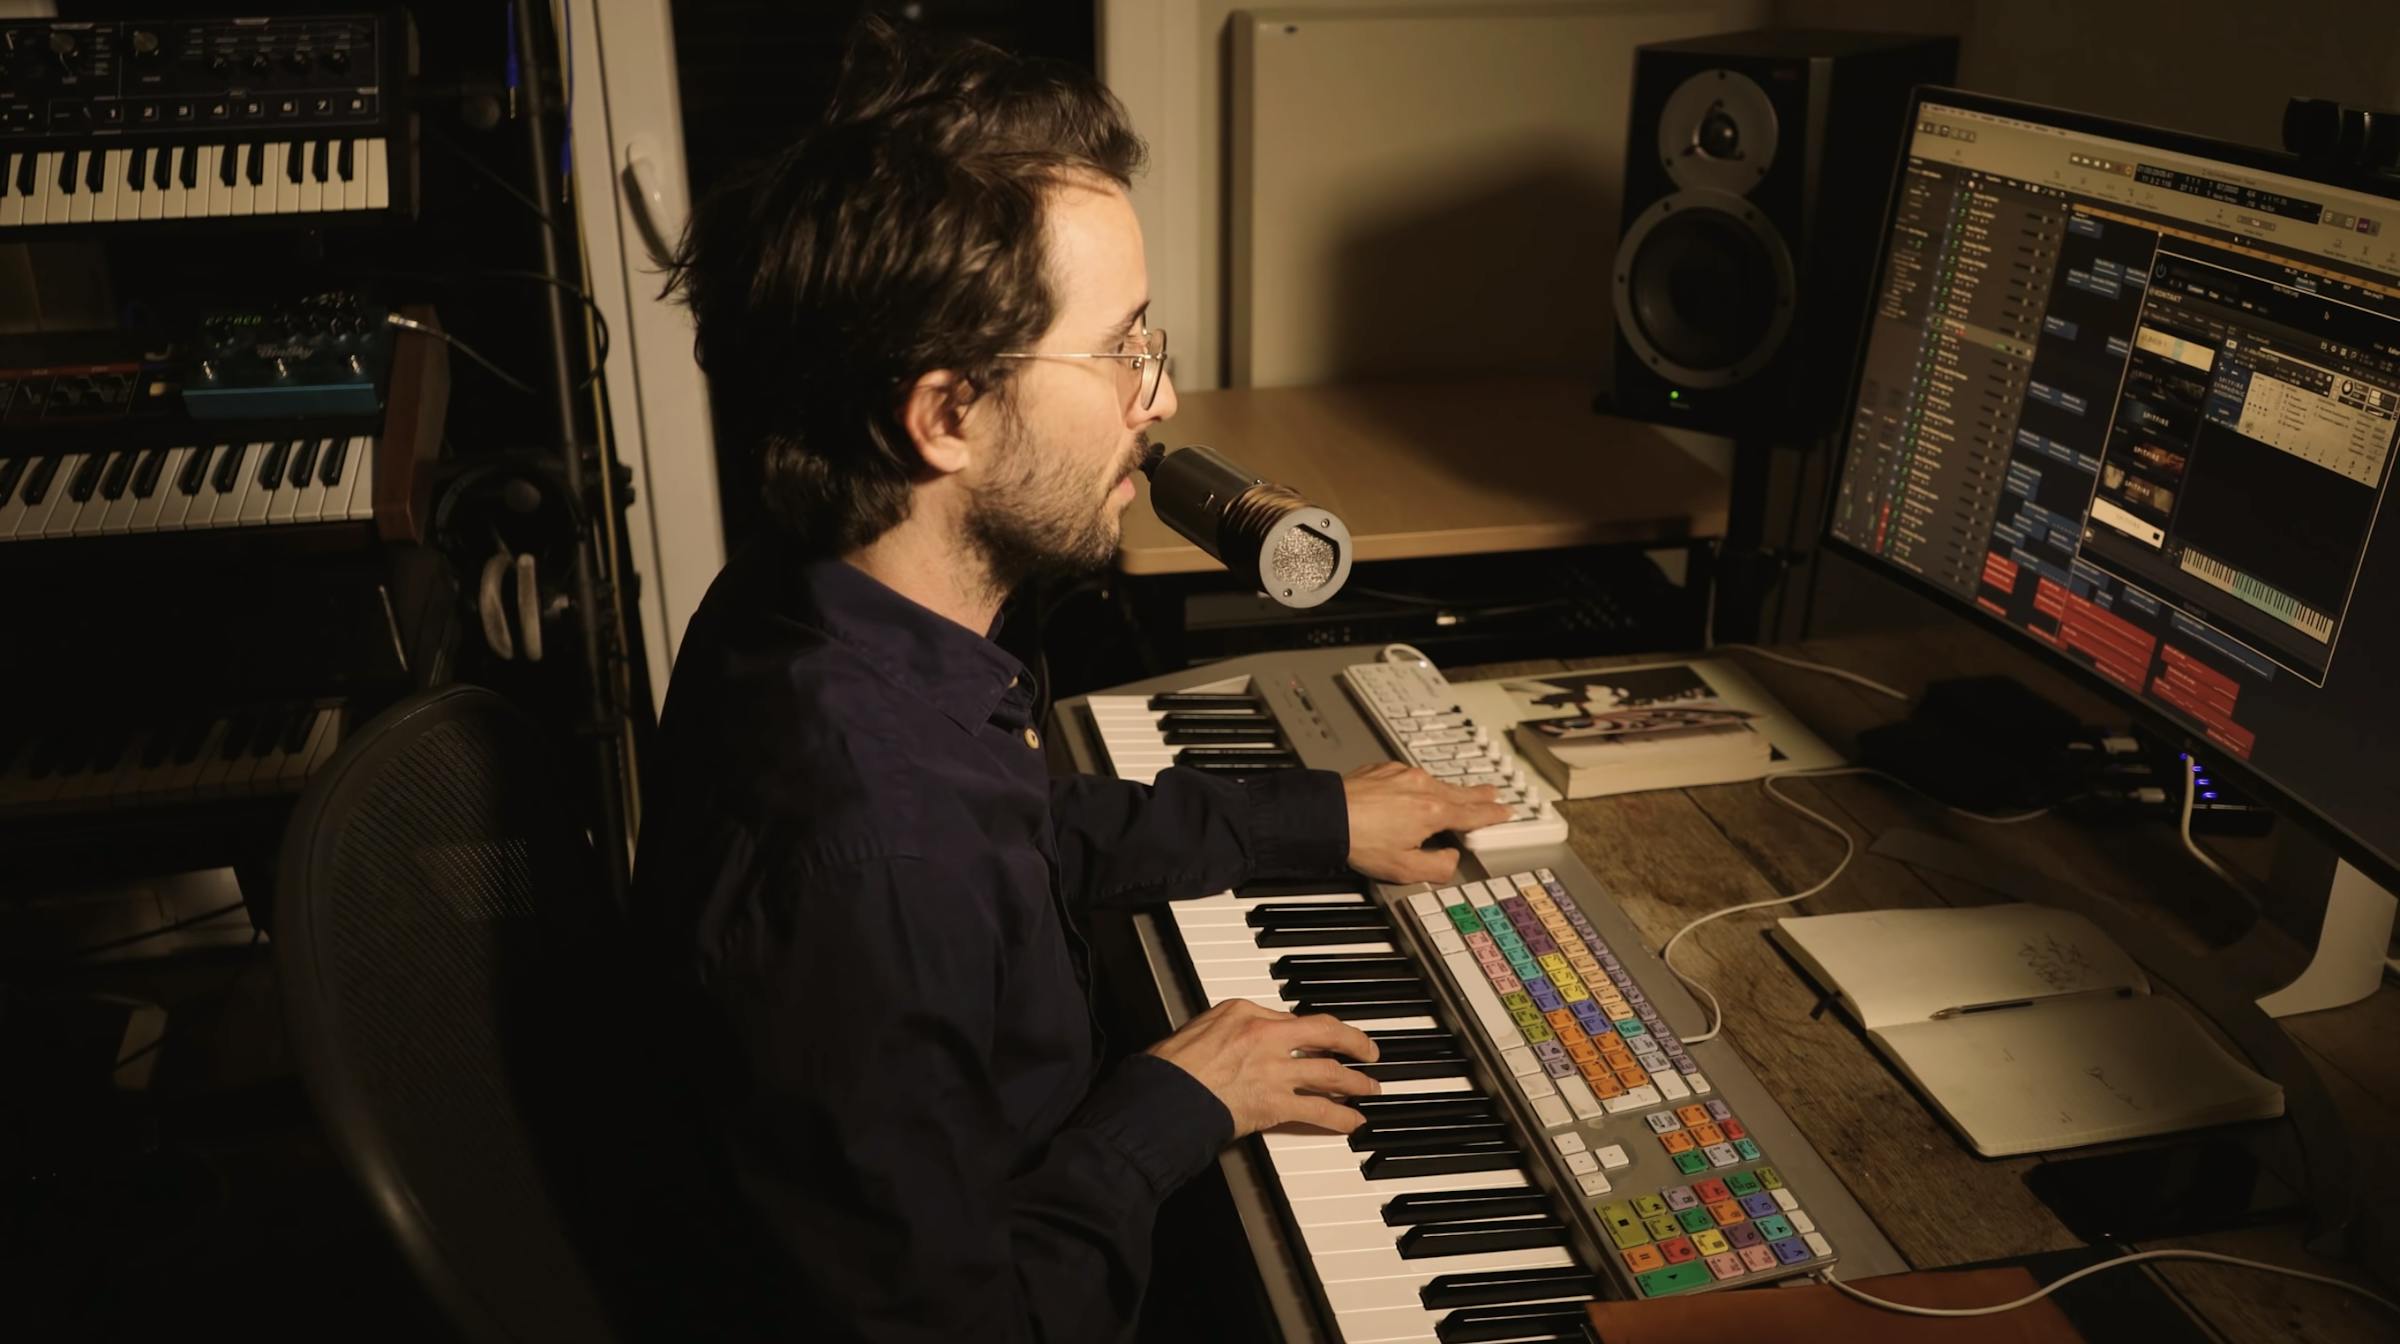 Oliver at his studio desk playing a MIDI keyboard